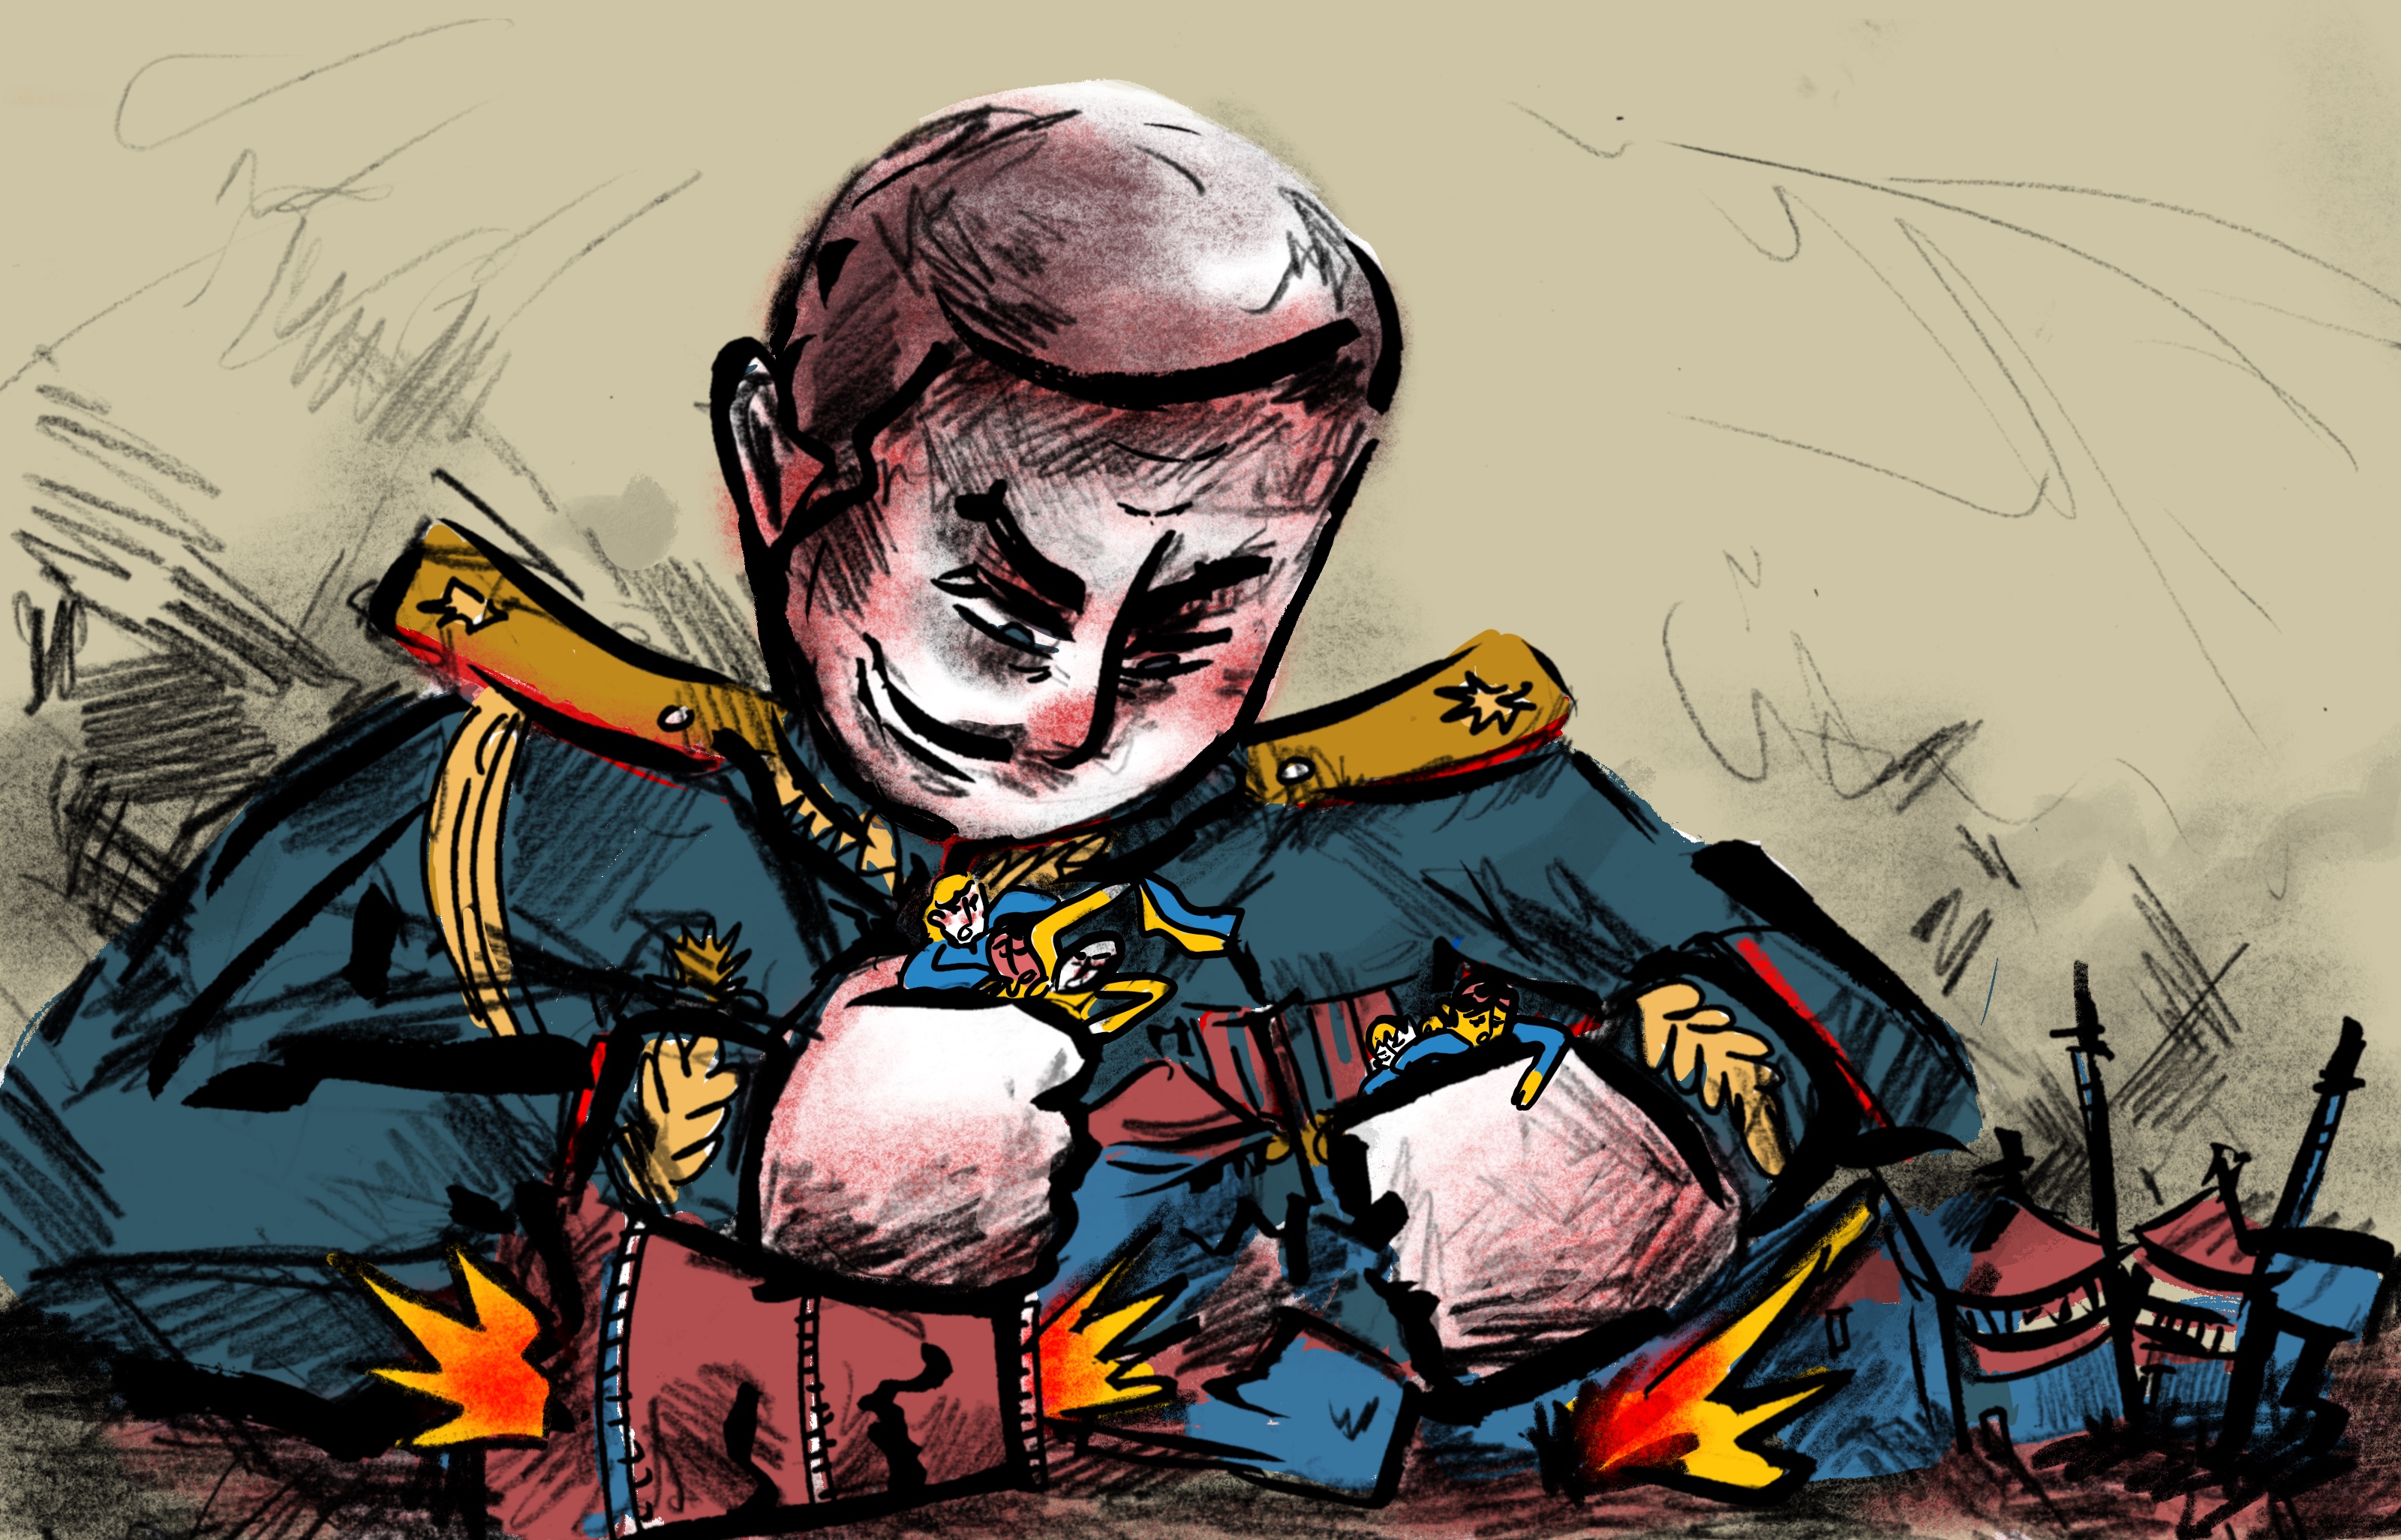 enerhodar_illustration generalRussian troops in the city are led by Russian Major General Valery Vasiliev, who allegedly ordered to disperse a pro-Ukrainian rally on April 2 with machine guns, stun grenades, and tear gas. (Illustration: Karolina Gulshani)